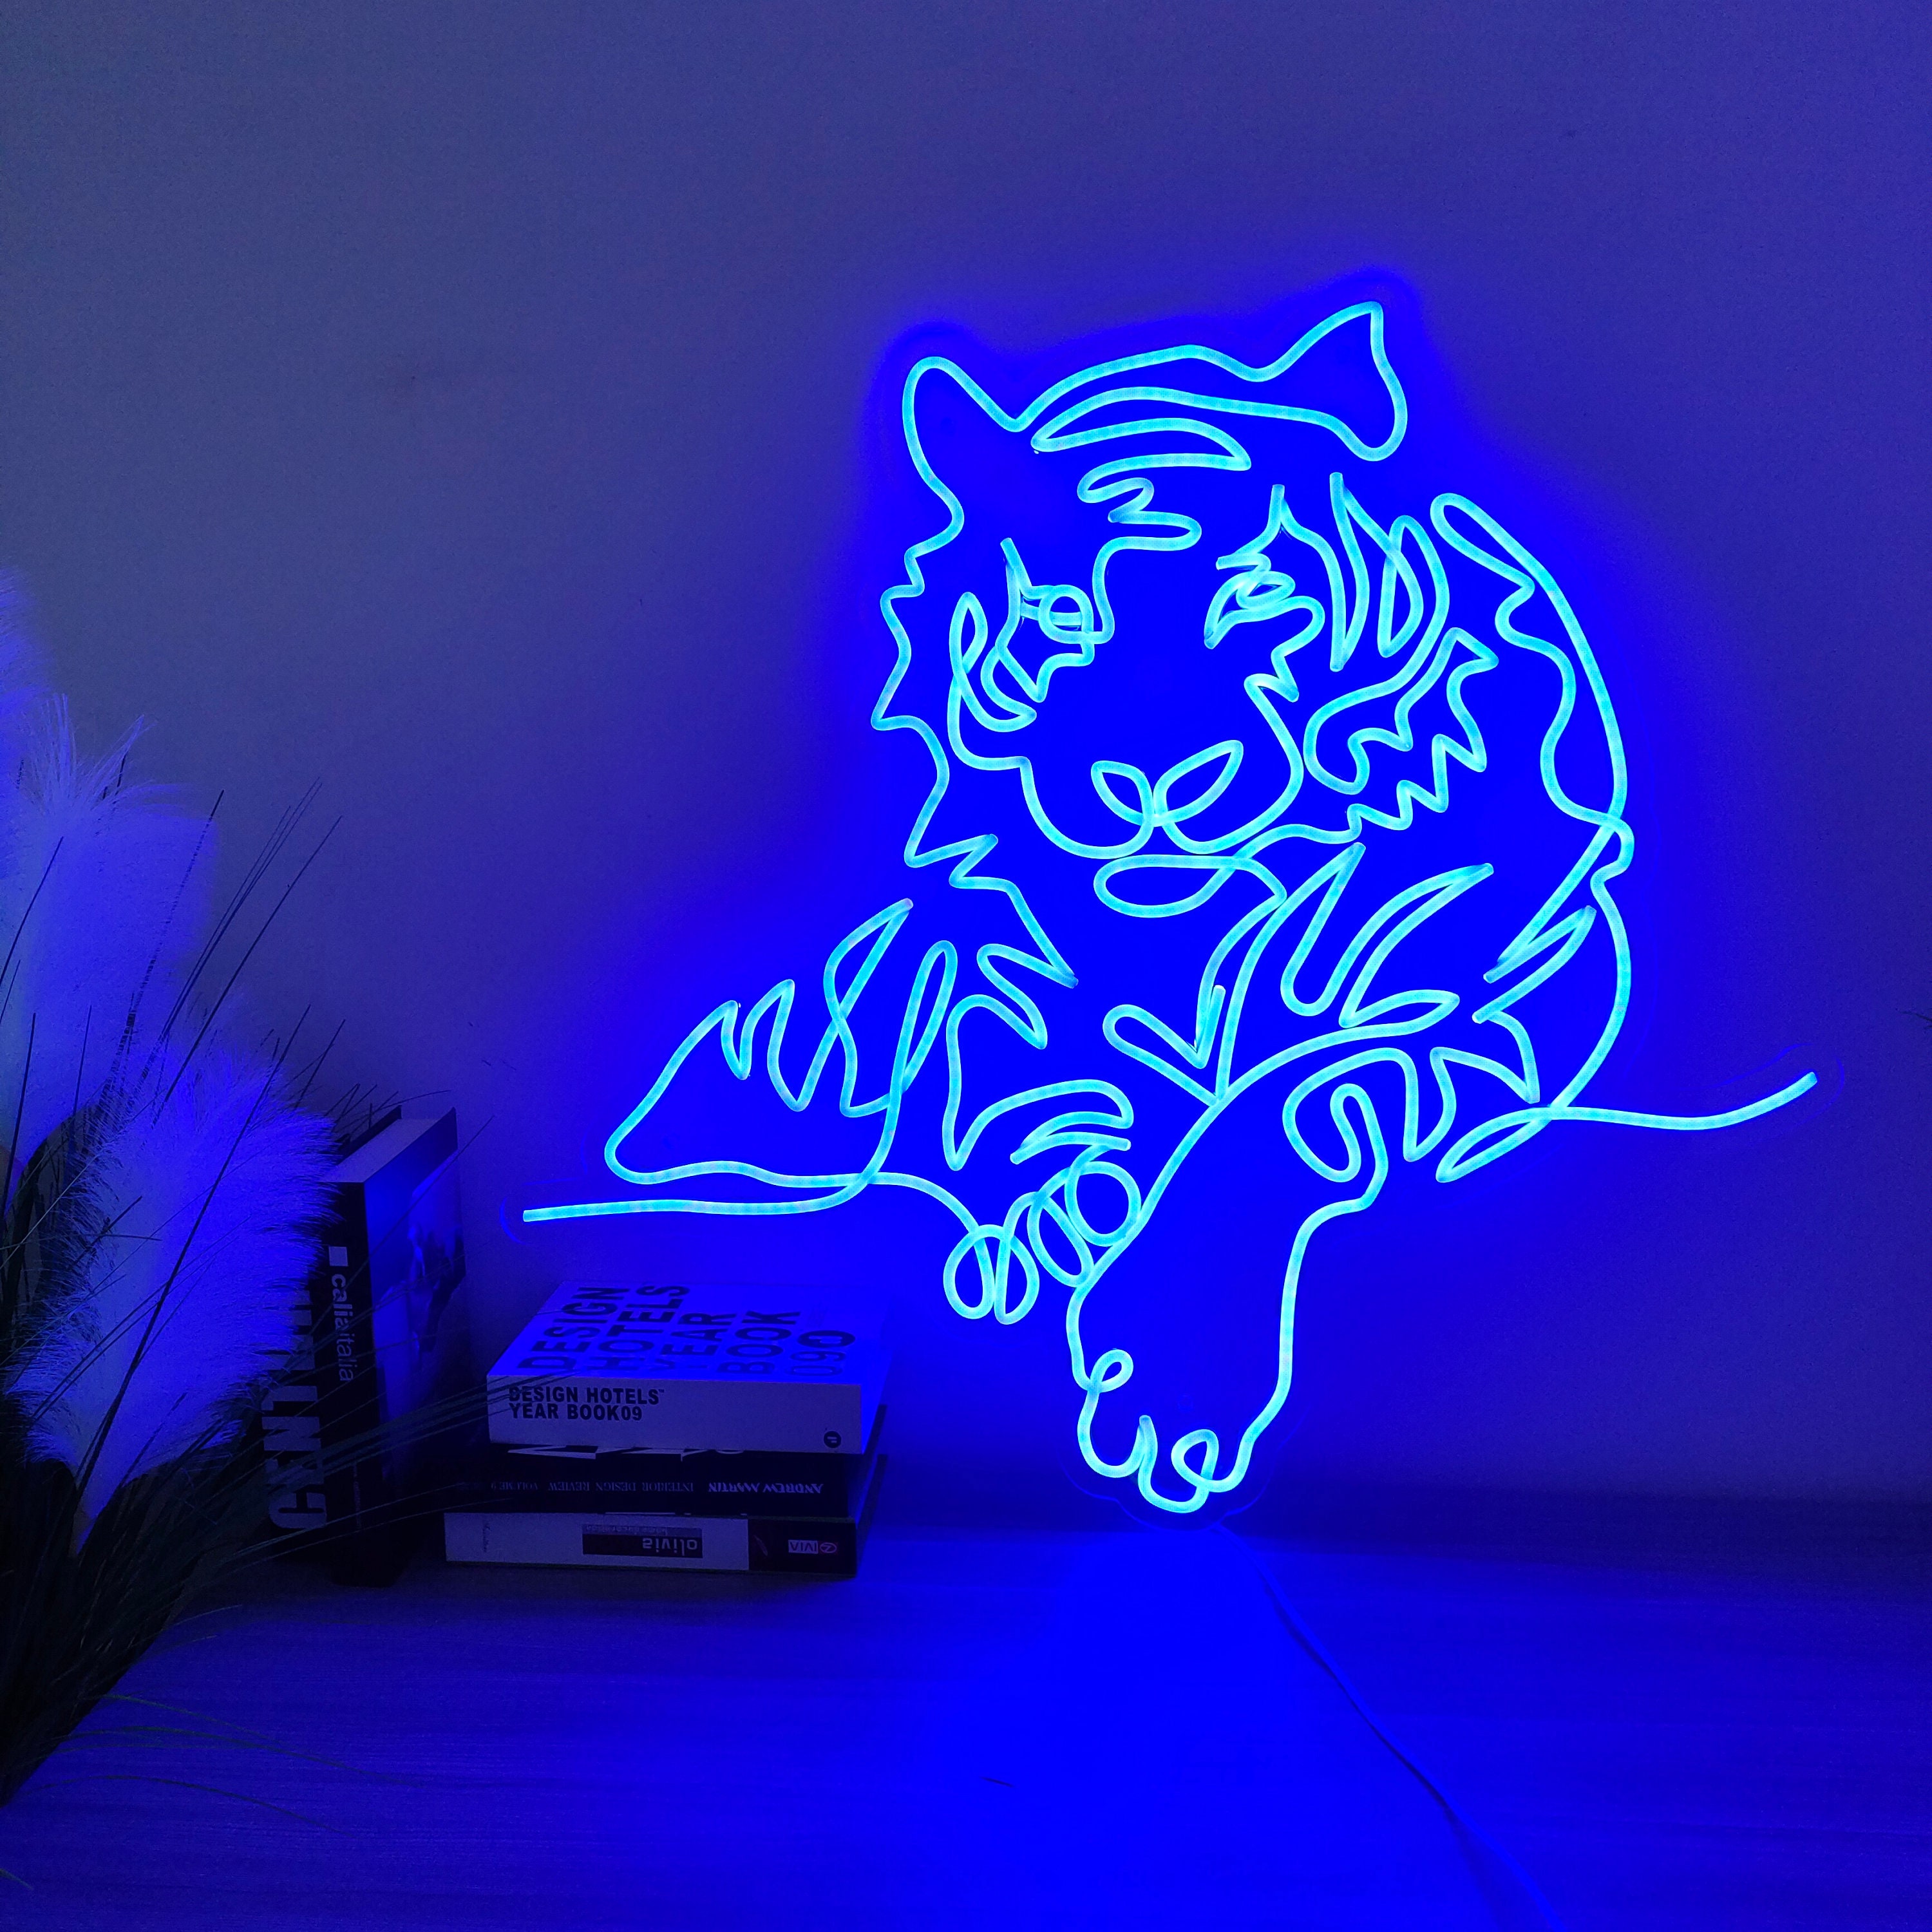 Buy Neon Sign Anime Neon Sign Game Room Sign Game Room Wall Art Game  Room Neon Bedroom Decor Neon Bedroom Gift for Teens 8 Inch By 30 Inch  Online at Low Prices